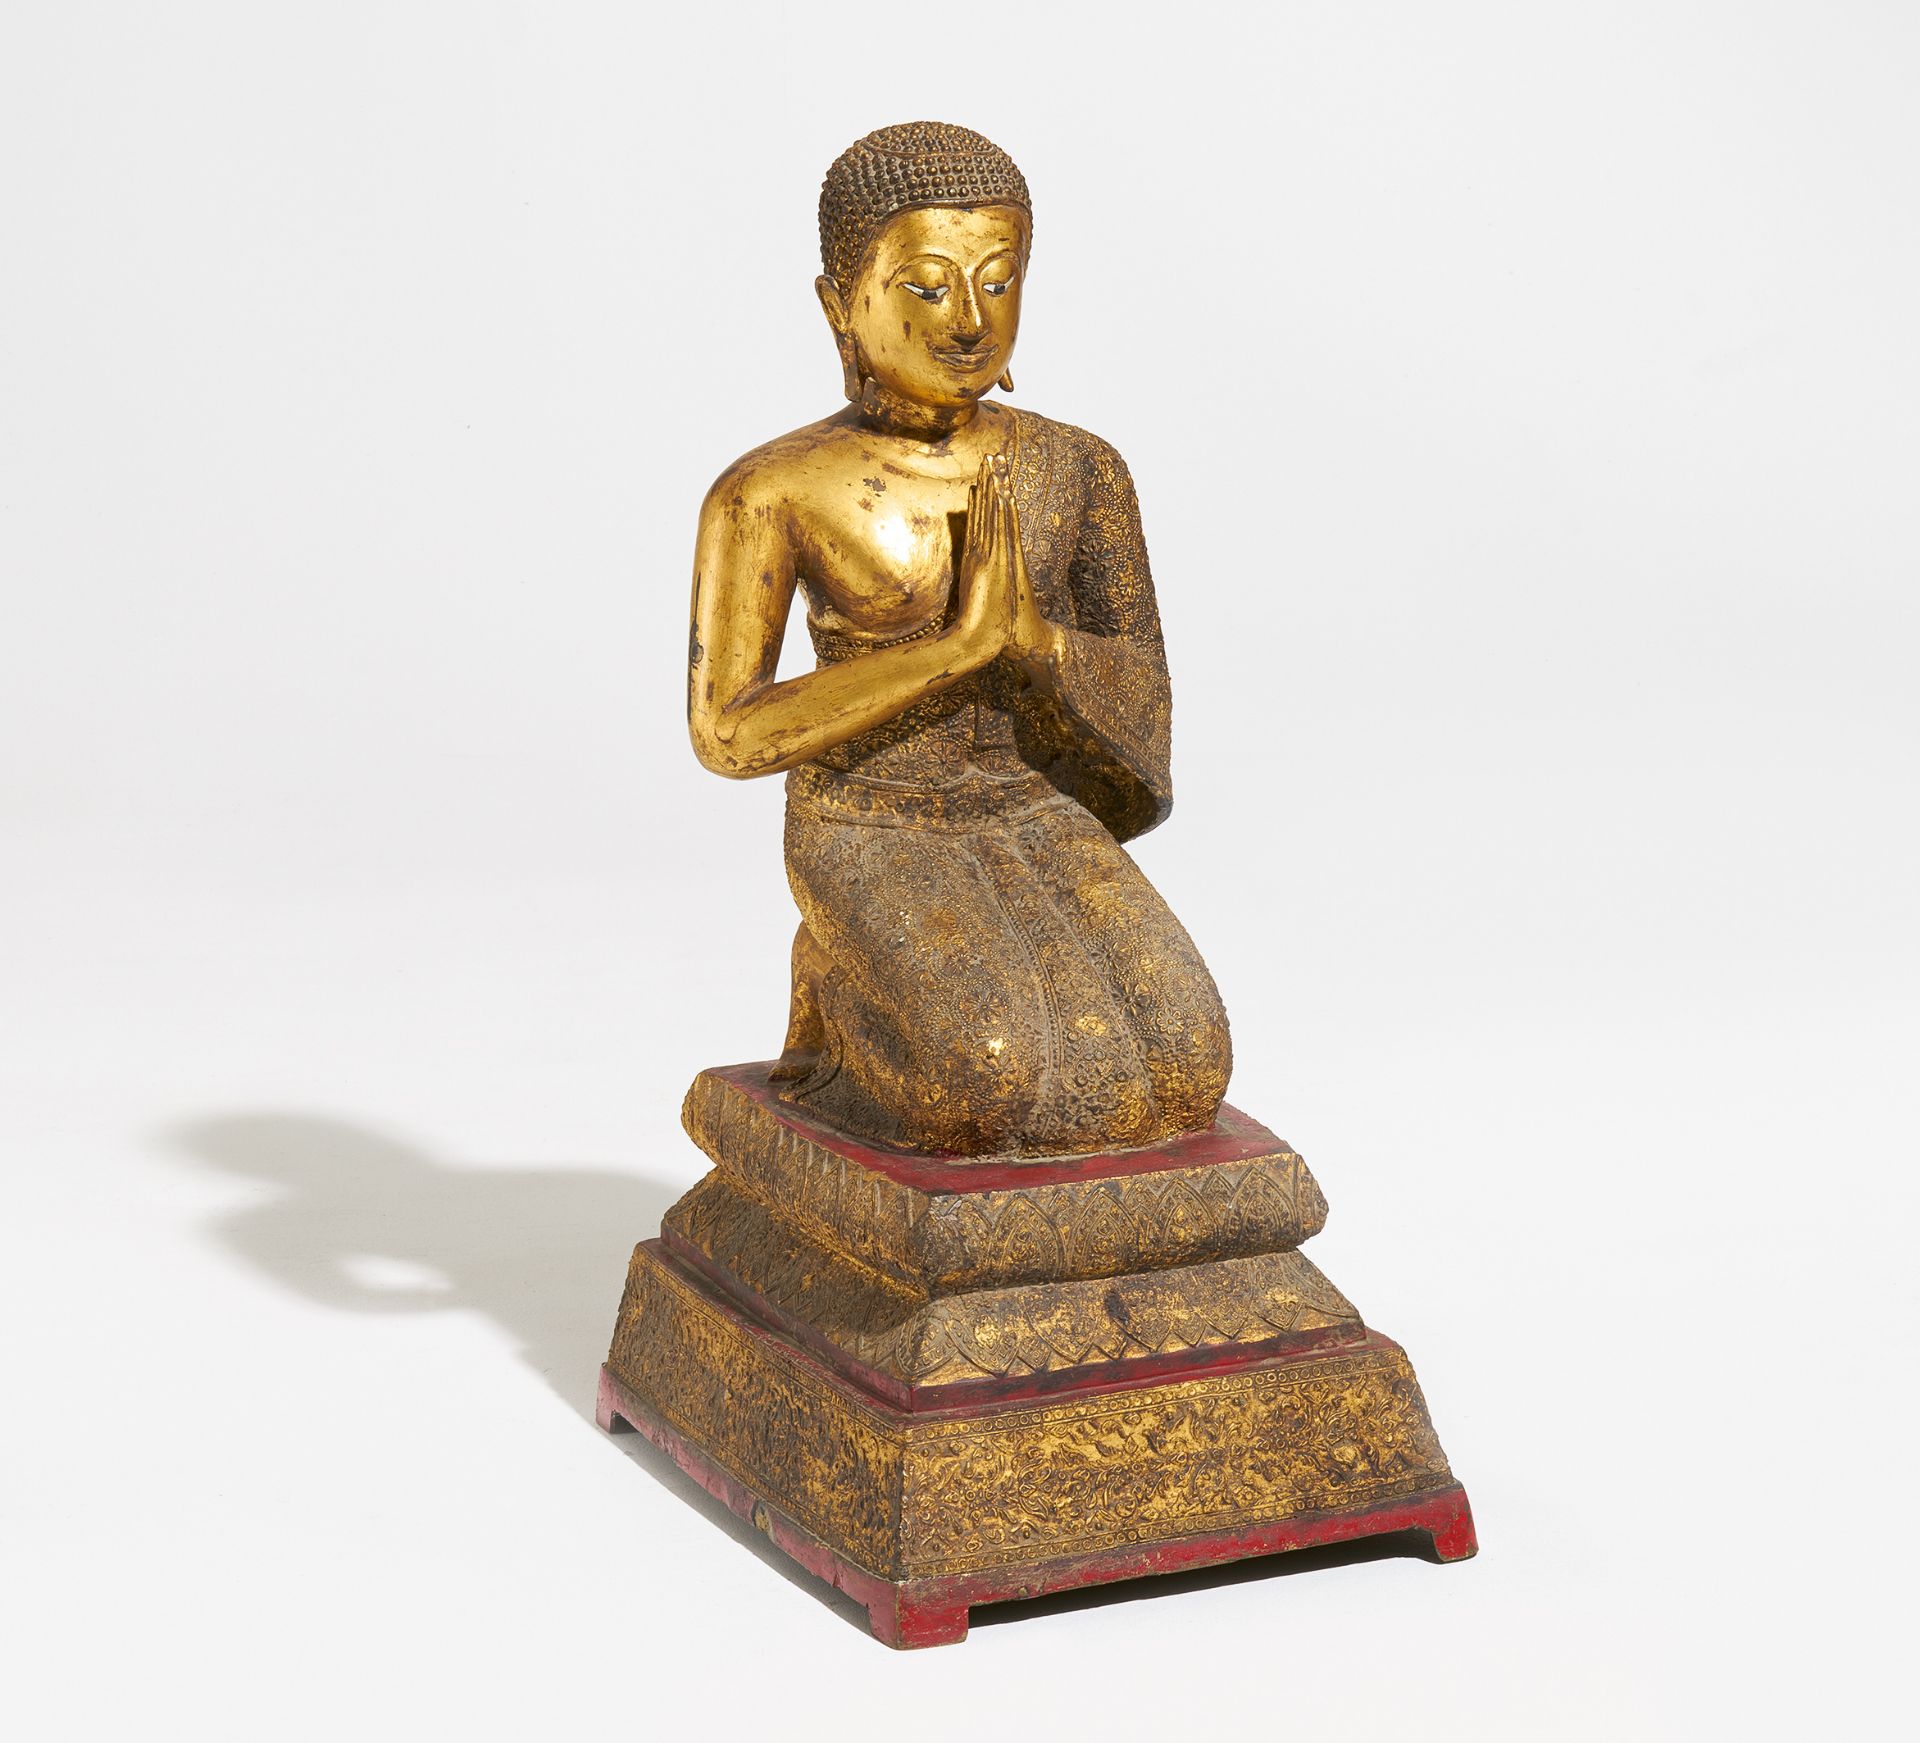 KNEELING MONK IN ANJALI MUDRA. Thailand. Ratanakosin period (from 1782). Late 19th - early 20th c.